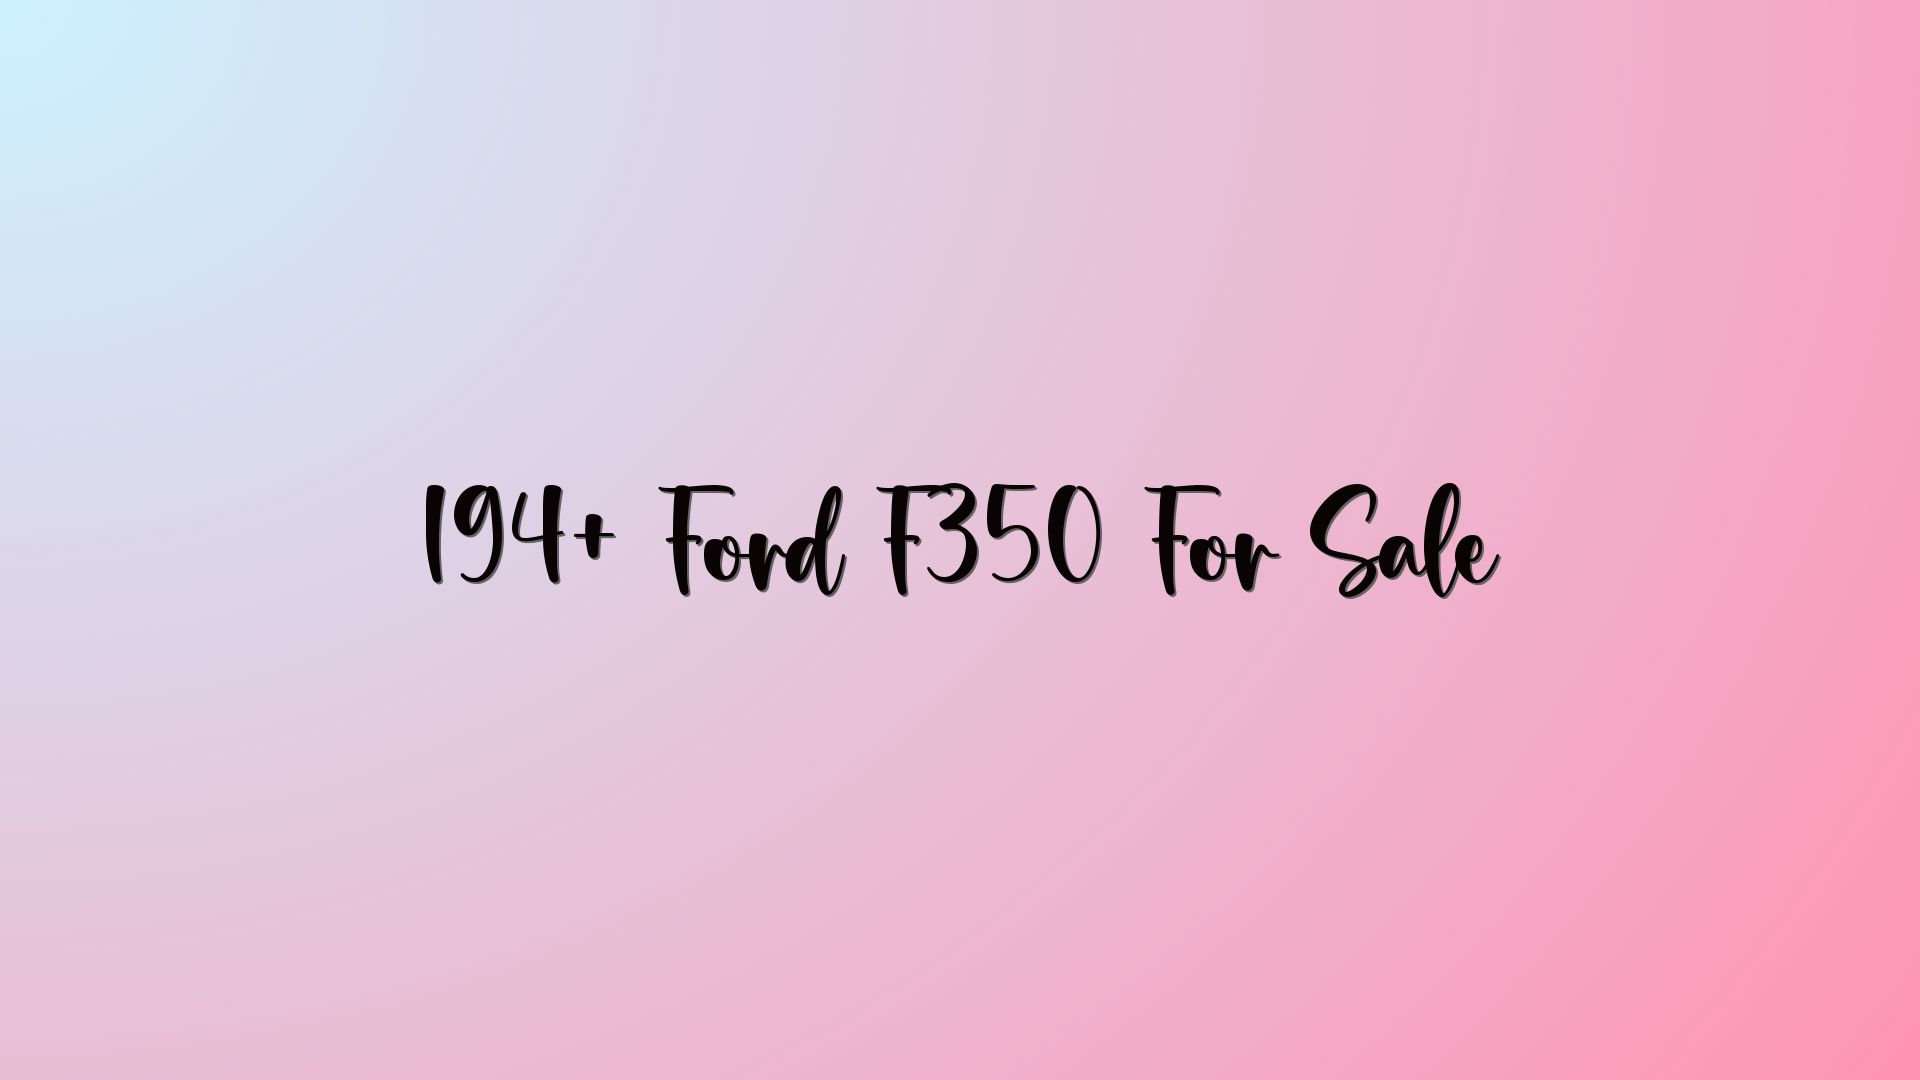 194+ Ford F350 For Sale